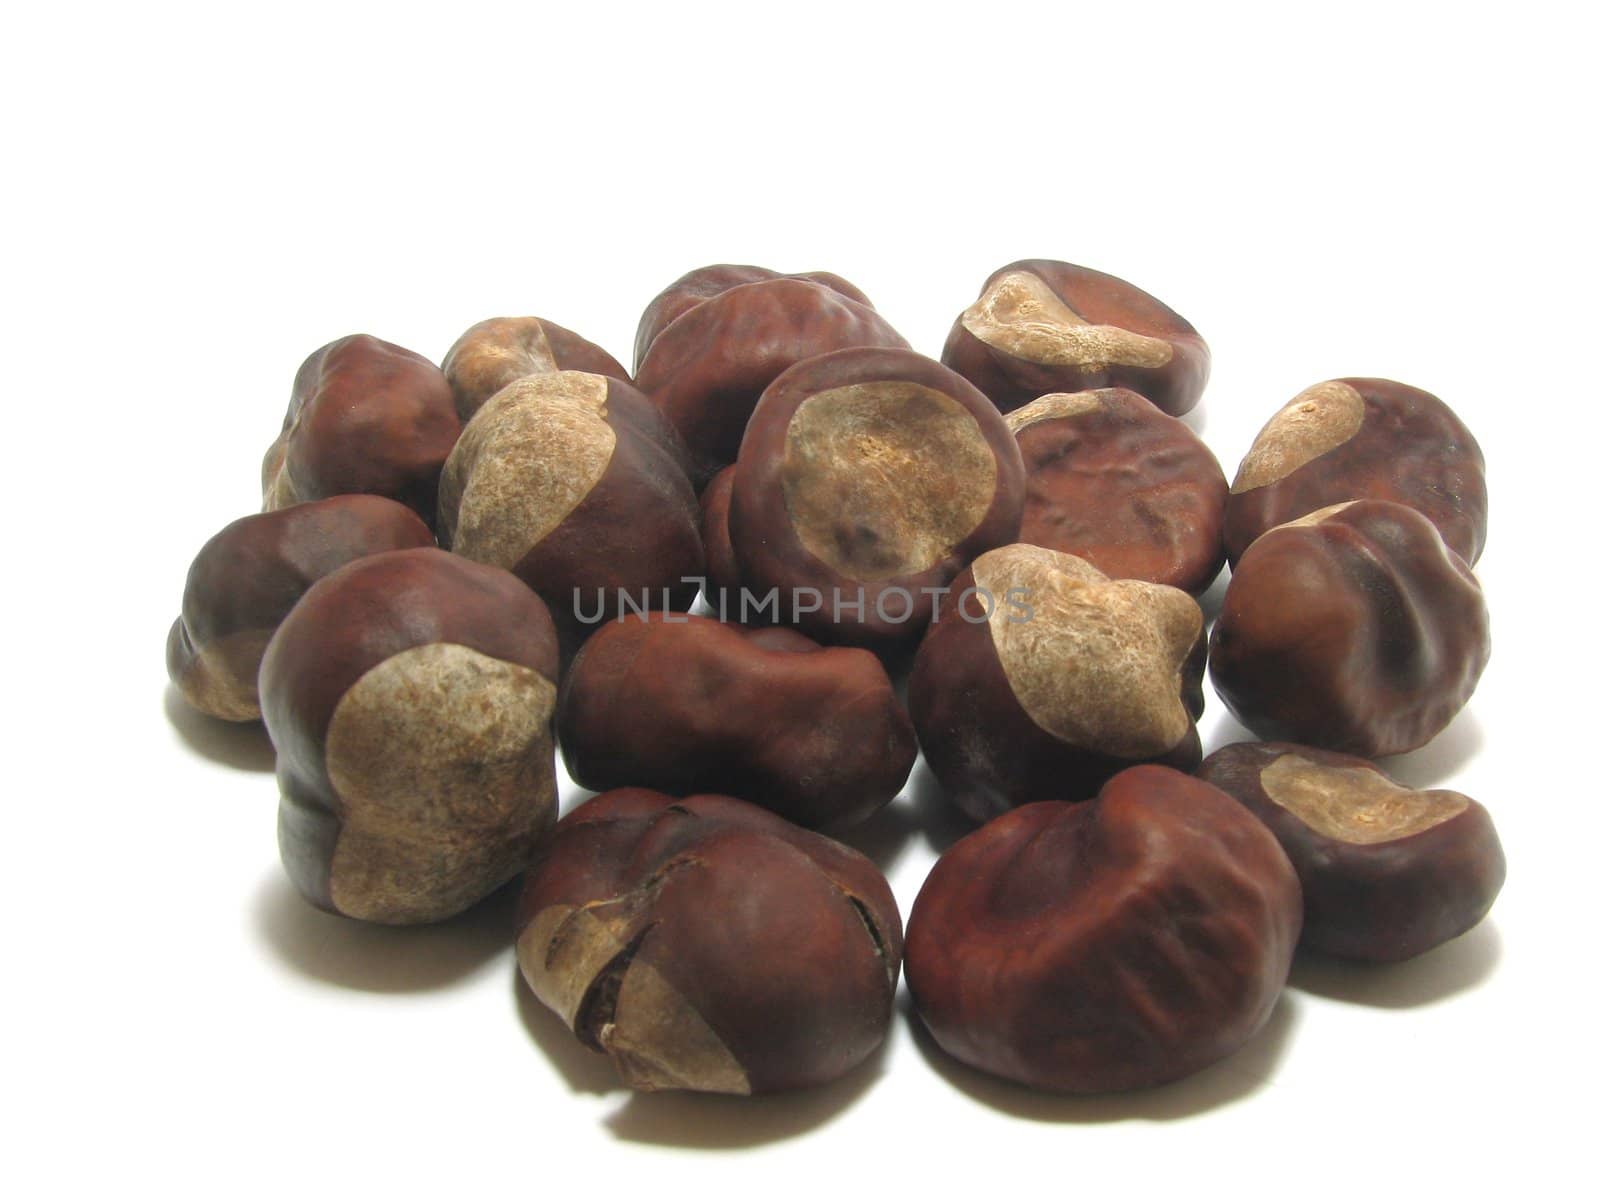 Handful of chestnuts on a white background